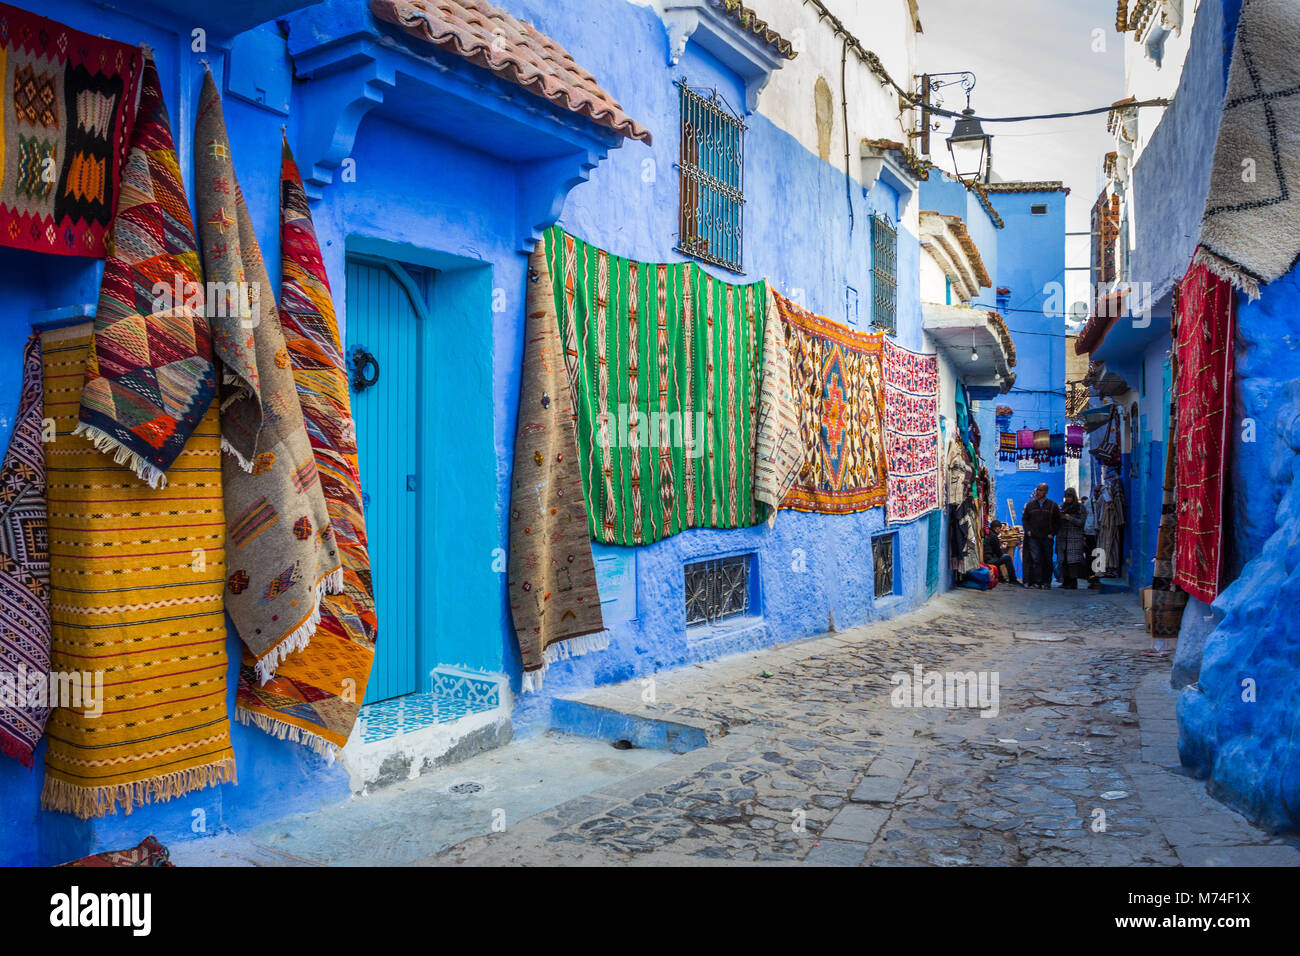 A colourful narrow street scene in the blue city of Chefchaouen, Morocco. Rugs, mats carpets on display in cobbled street with people in distant view Stock Photo